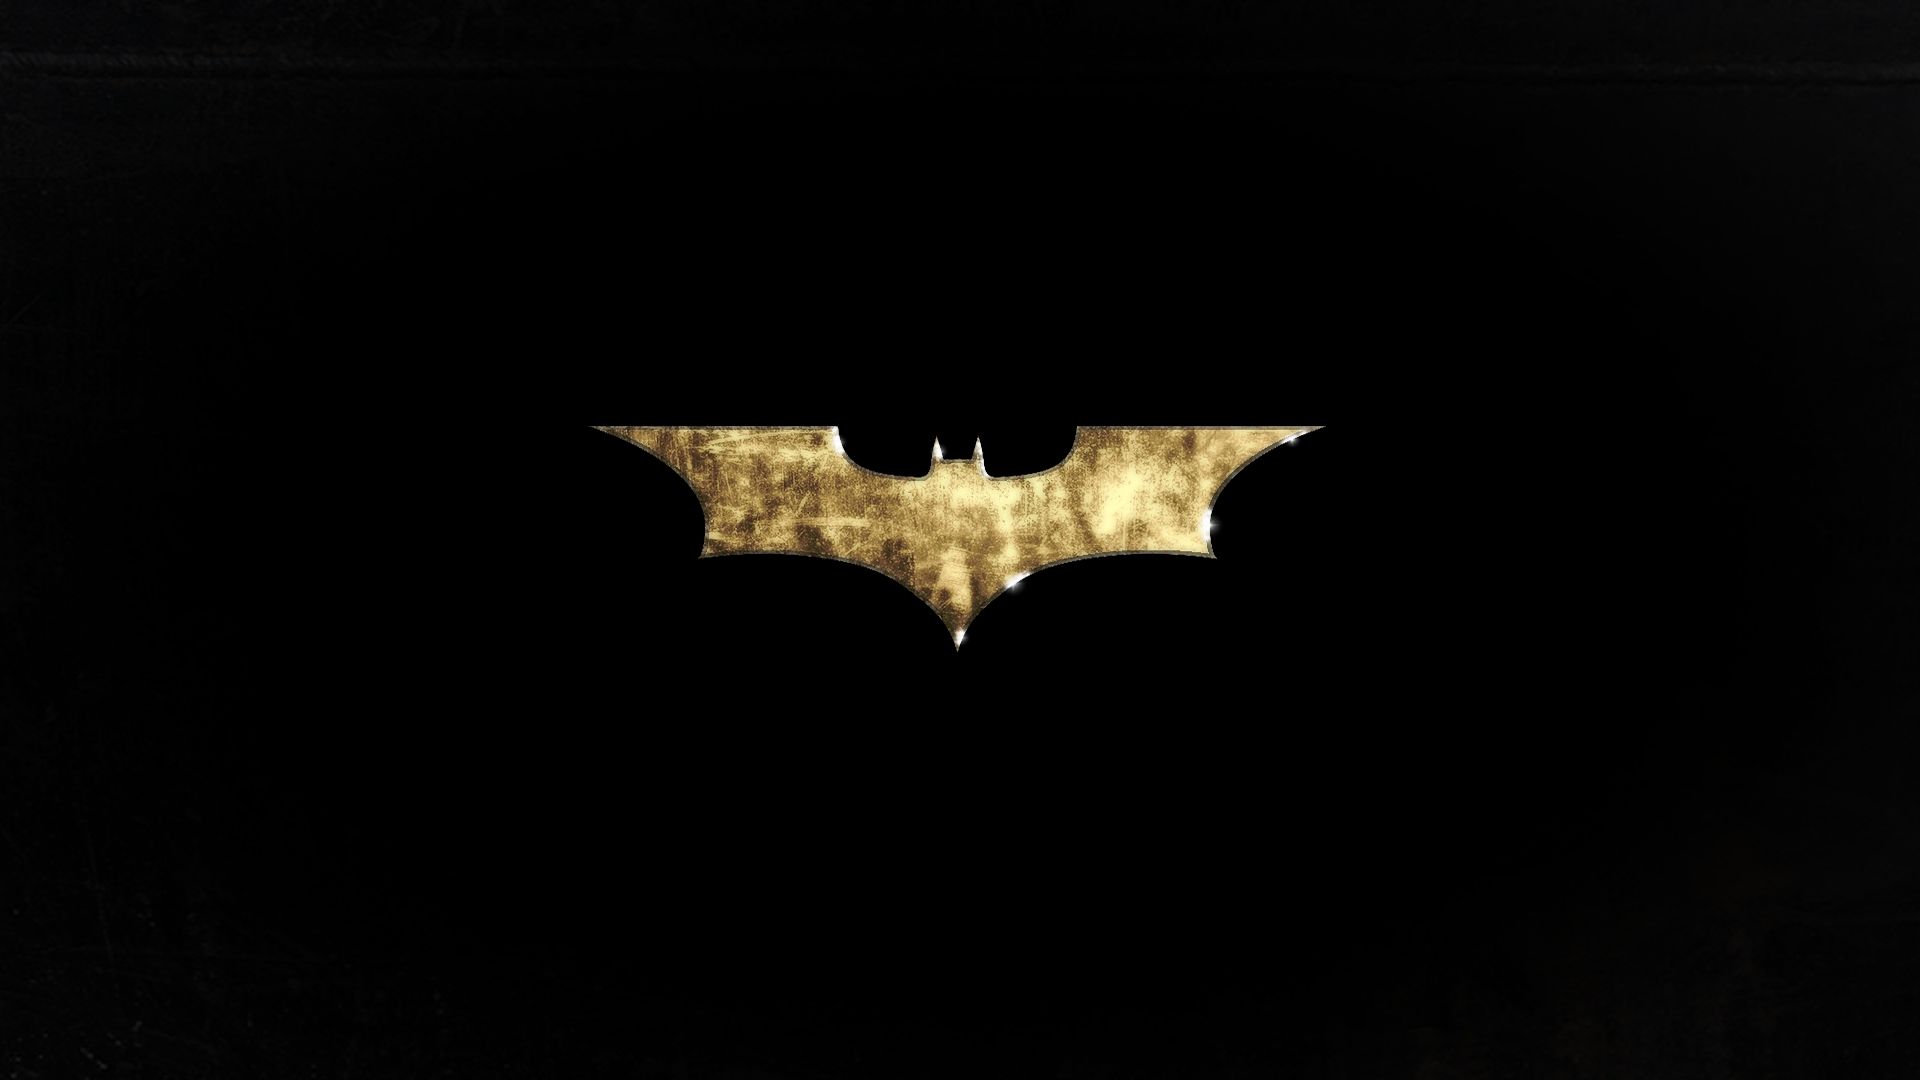 Batman Backgrounds New 2016 free download | Wallpapers ...